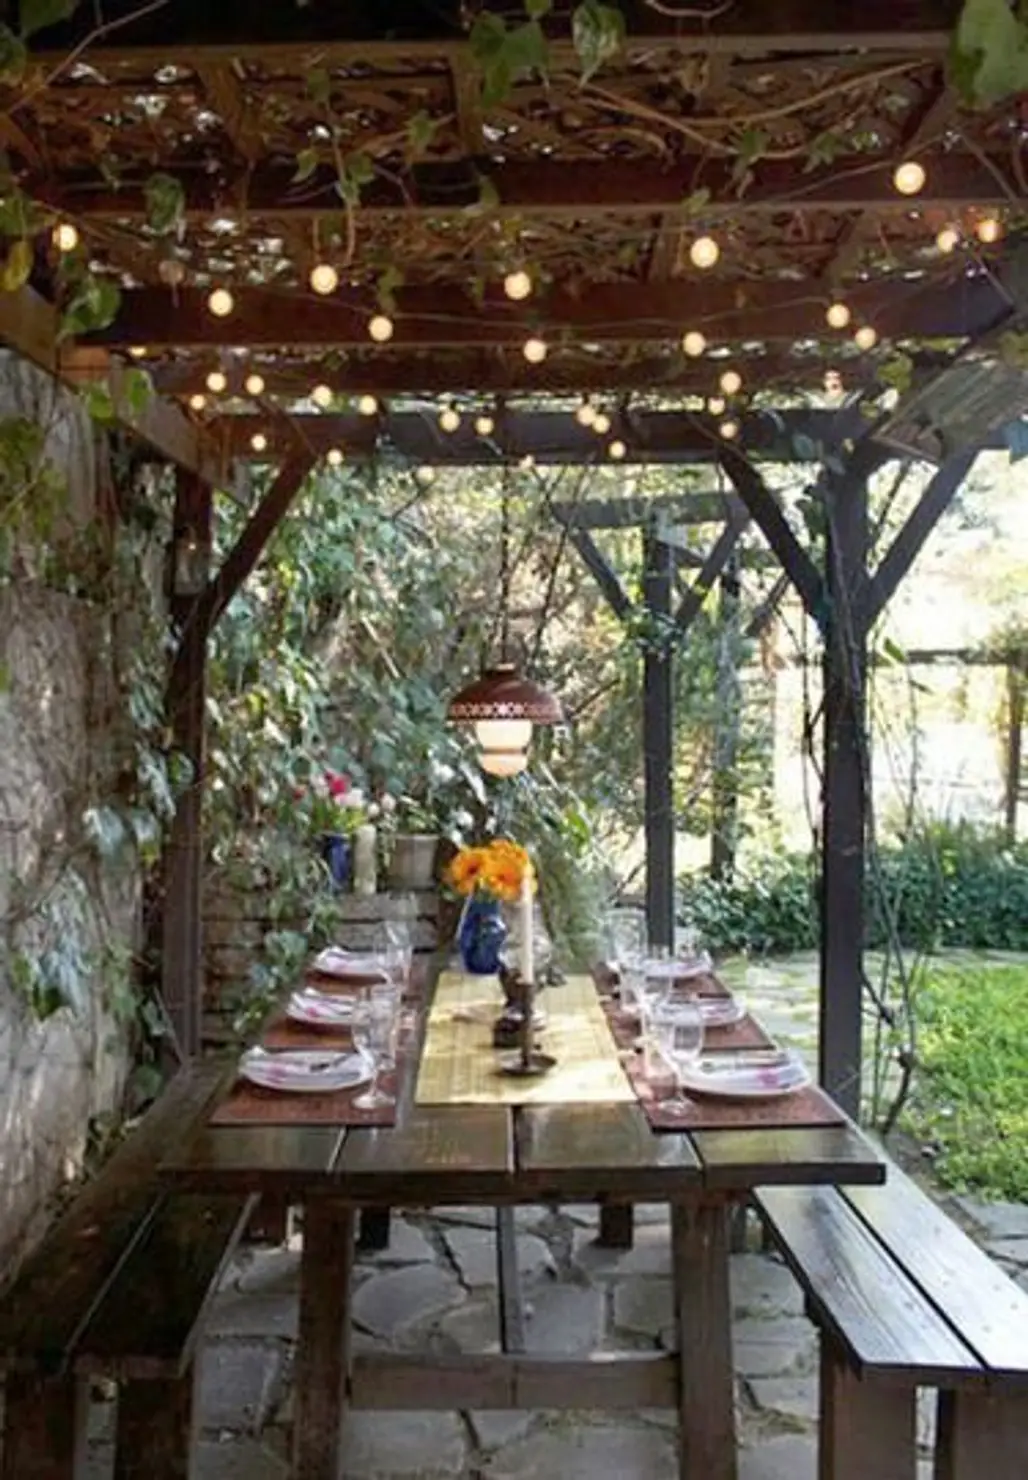 An Arbor and Vine with Picnic Table